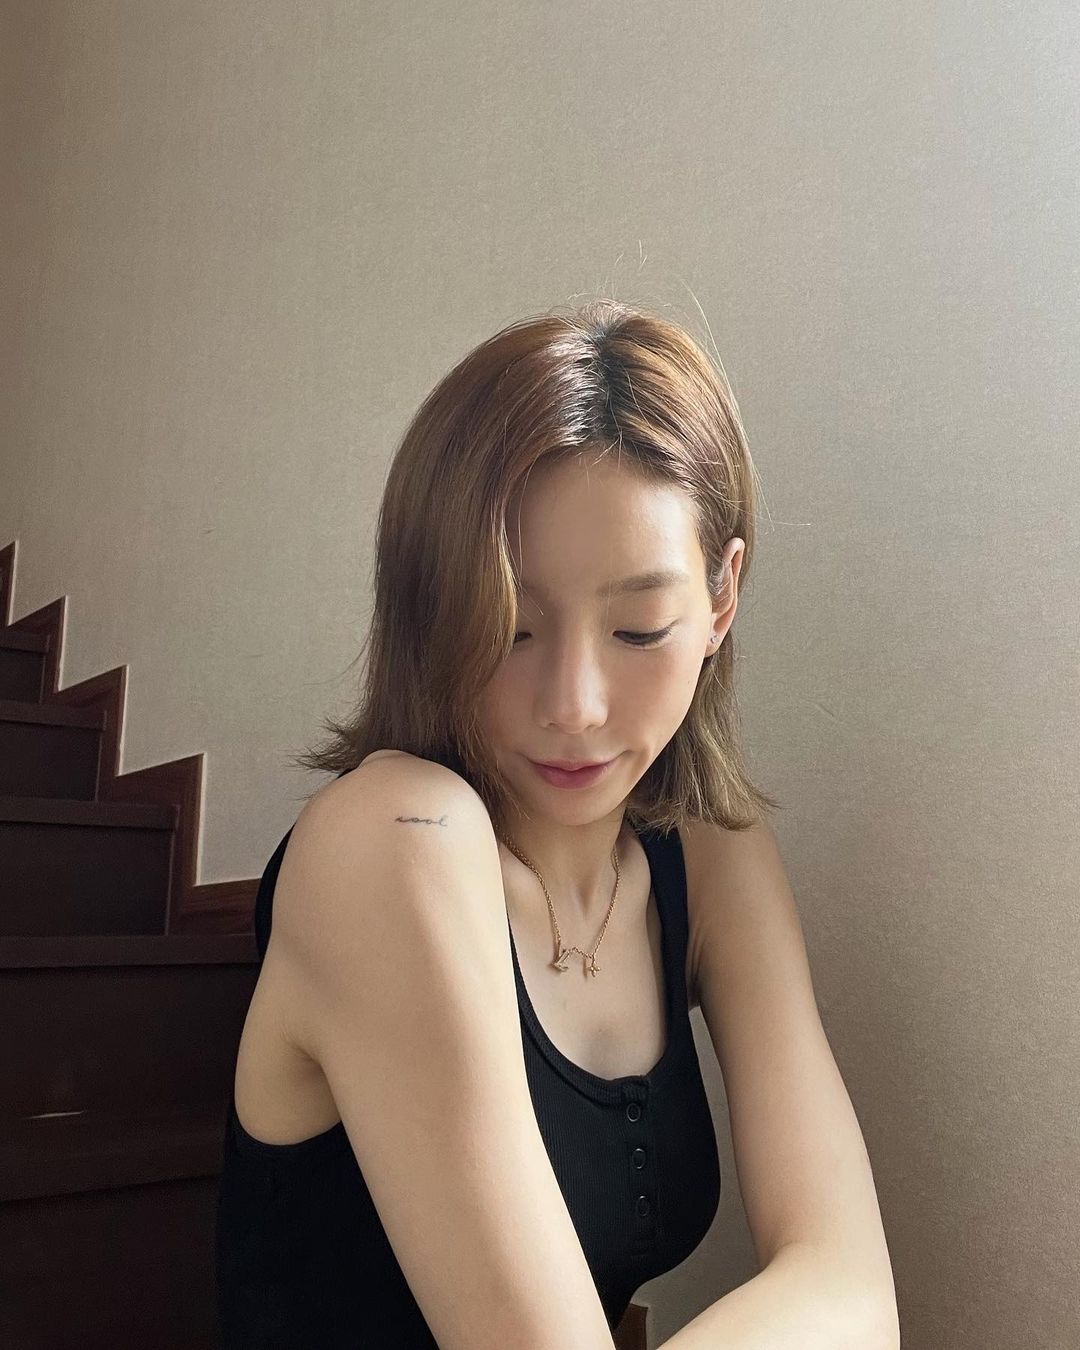 Taeyeon, the glamor that doesn't fit the microfiber forearm... the one who has it all